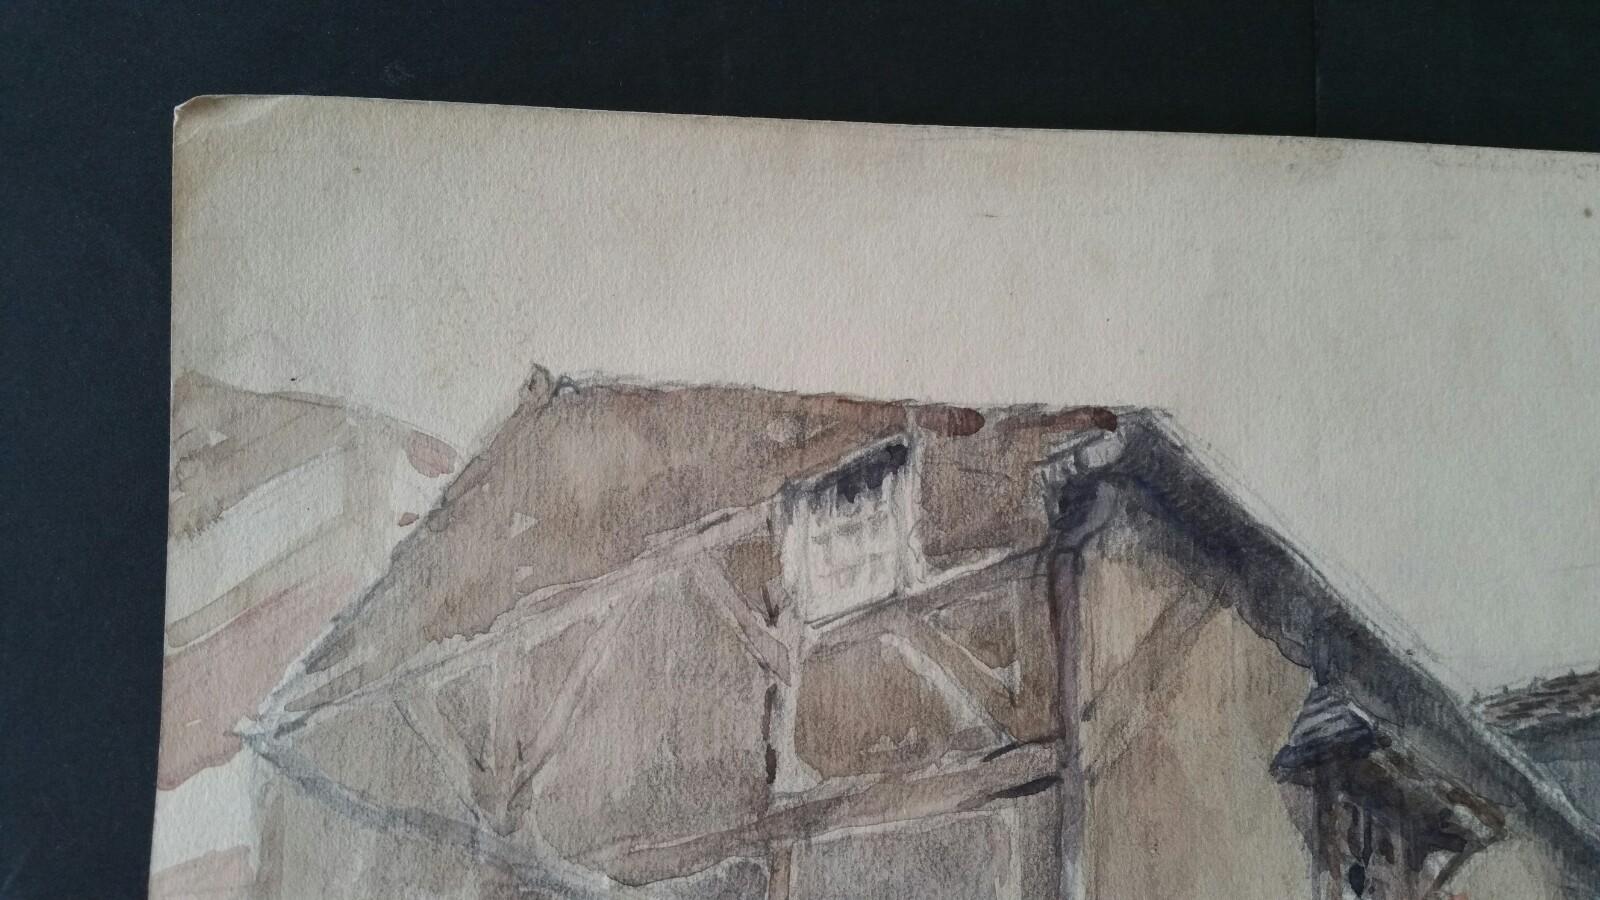 Paris: Atelier Rue Alain Chartier
by Henri Miloch (1898-1979)
unsigned but inscribed by Miloch verso
watercolour and graphite painting on artist's paper, unframed

sheet: 11 x 14 inches

Charming painting by the highly regarded painter, Henri